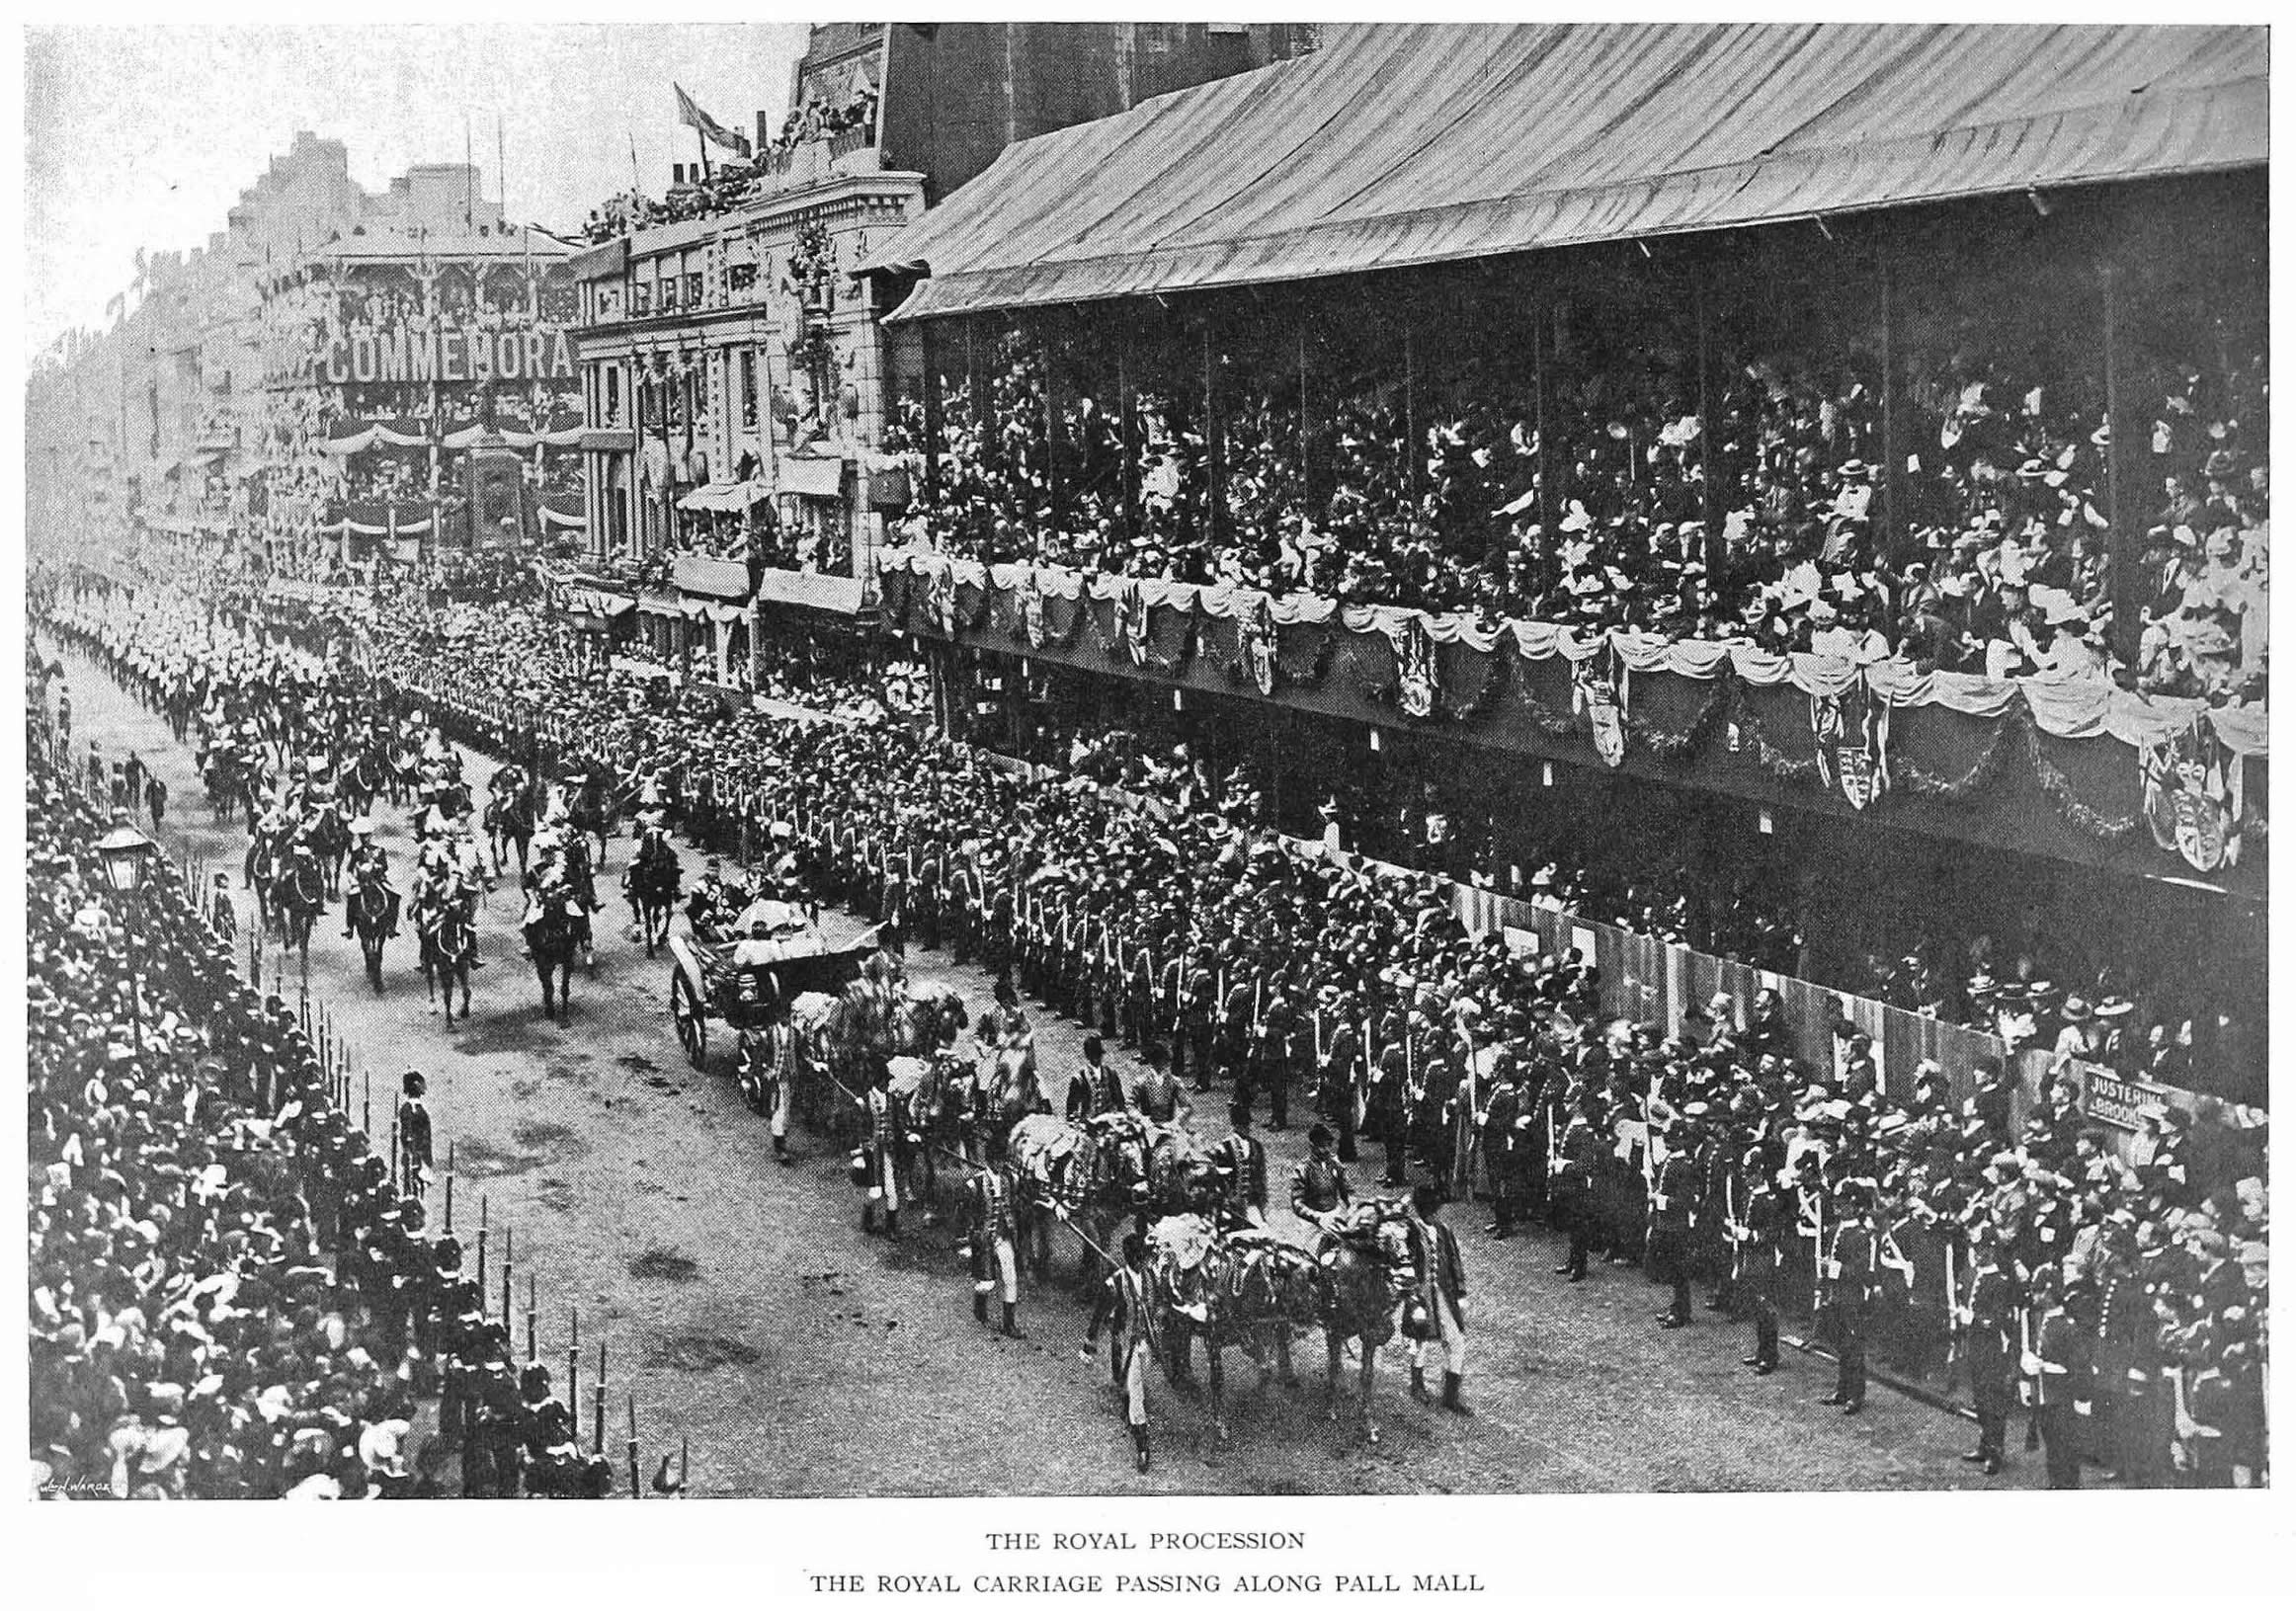 The Royal Procession 1897 taken from The Queen's Reign – Peerage, Gentry & Royalty Records on TheGenealogist